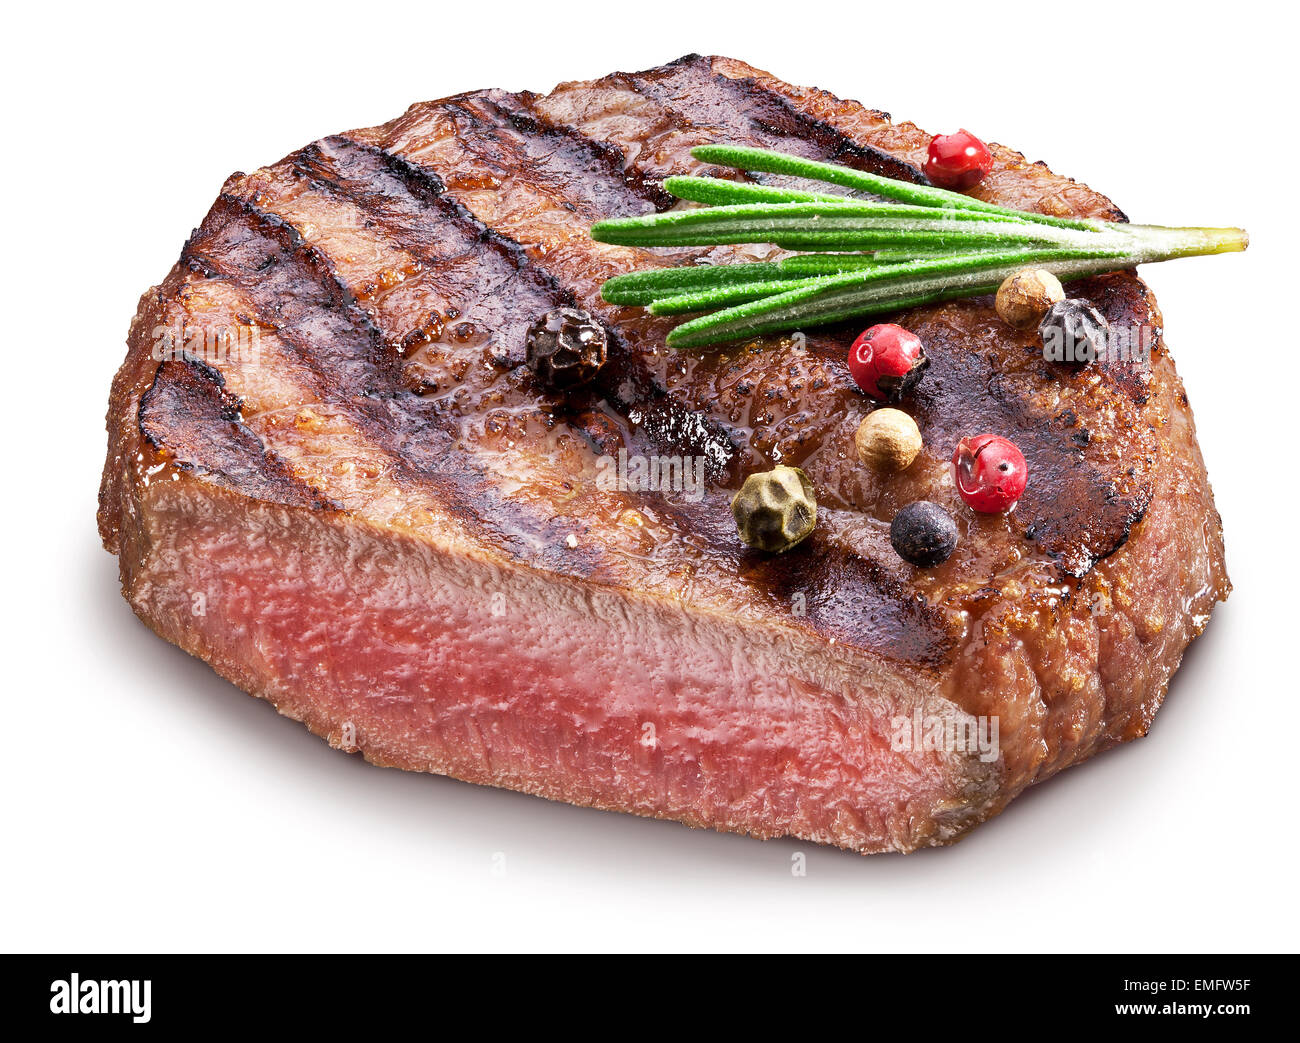 Beef steak with spices. File contains clipping paths. Stock Photo